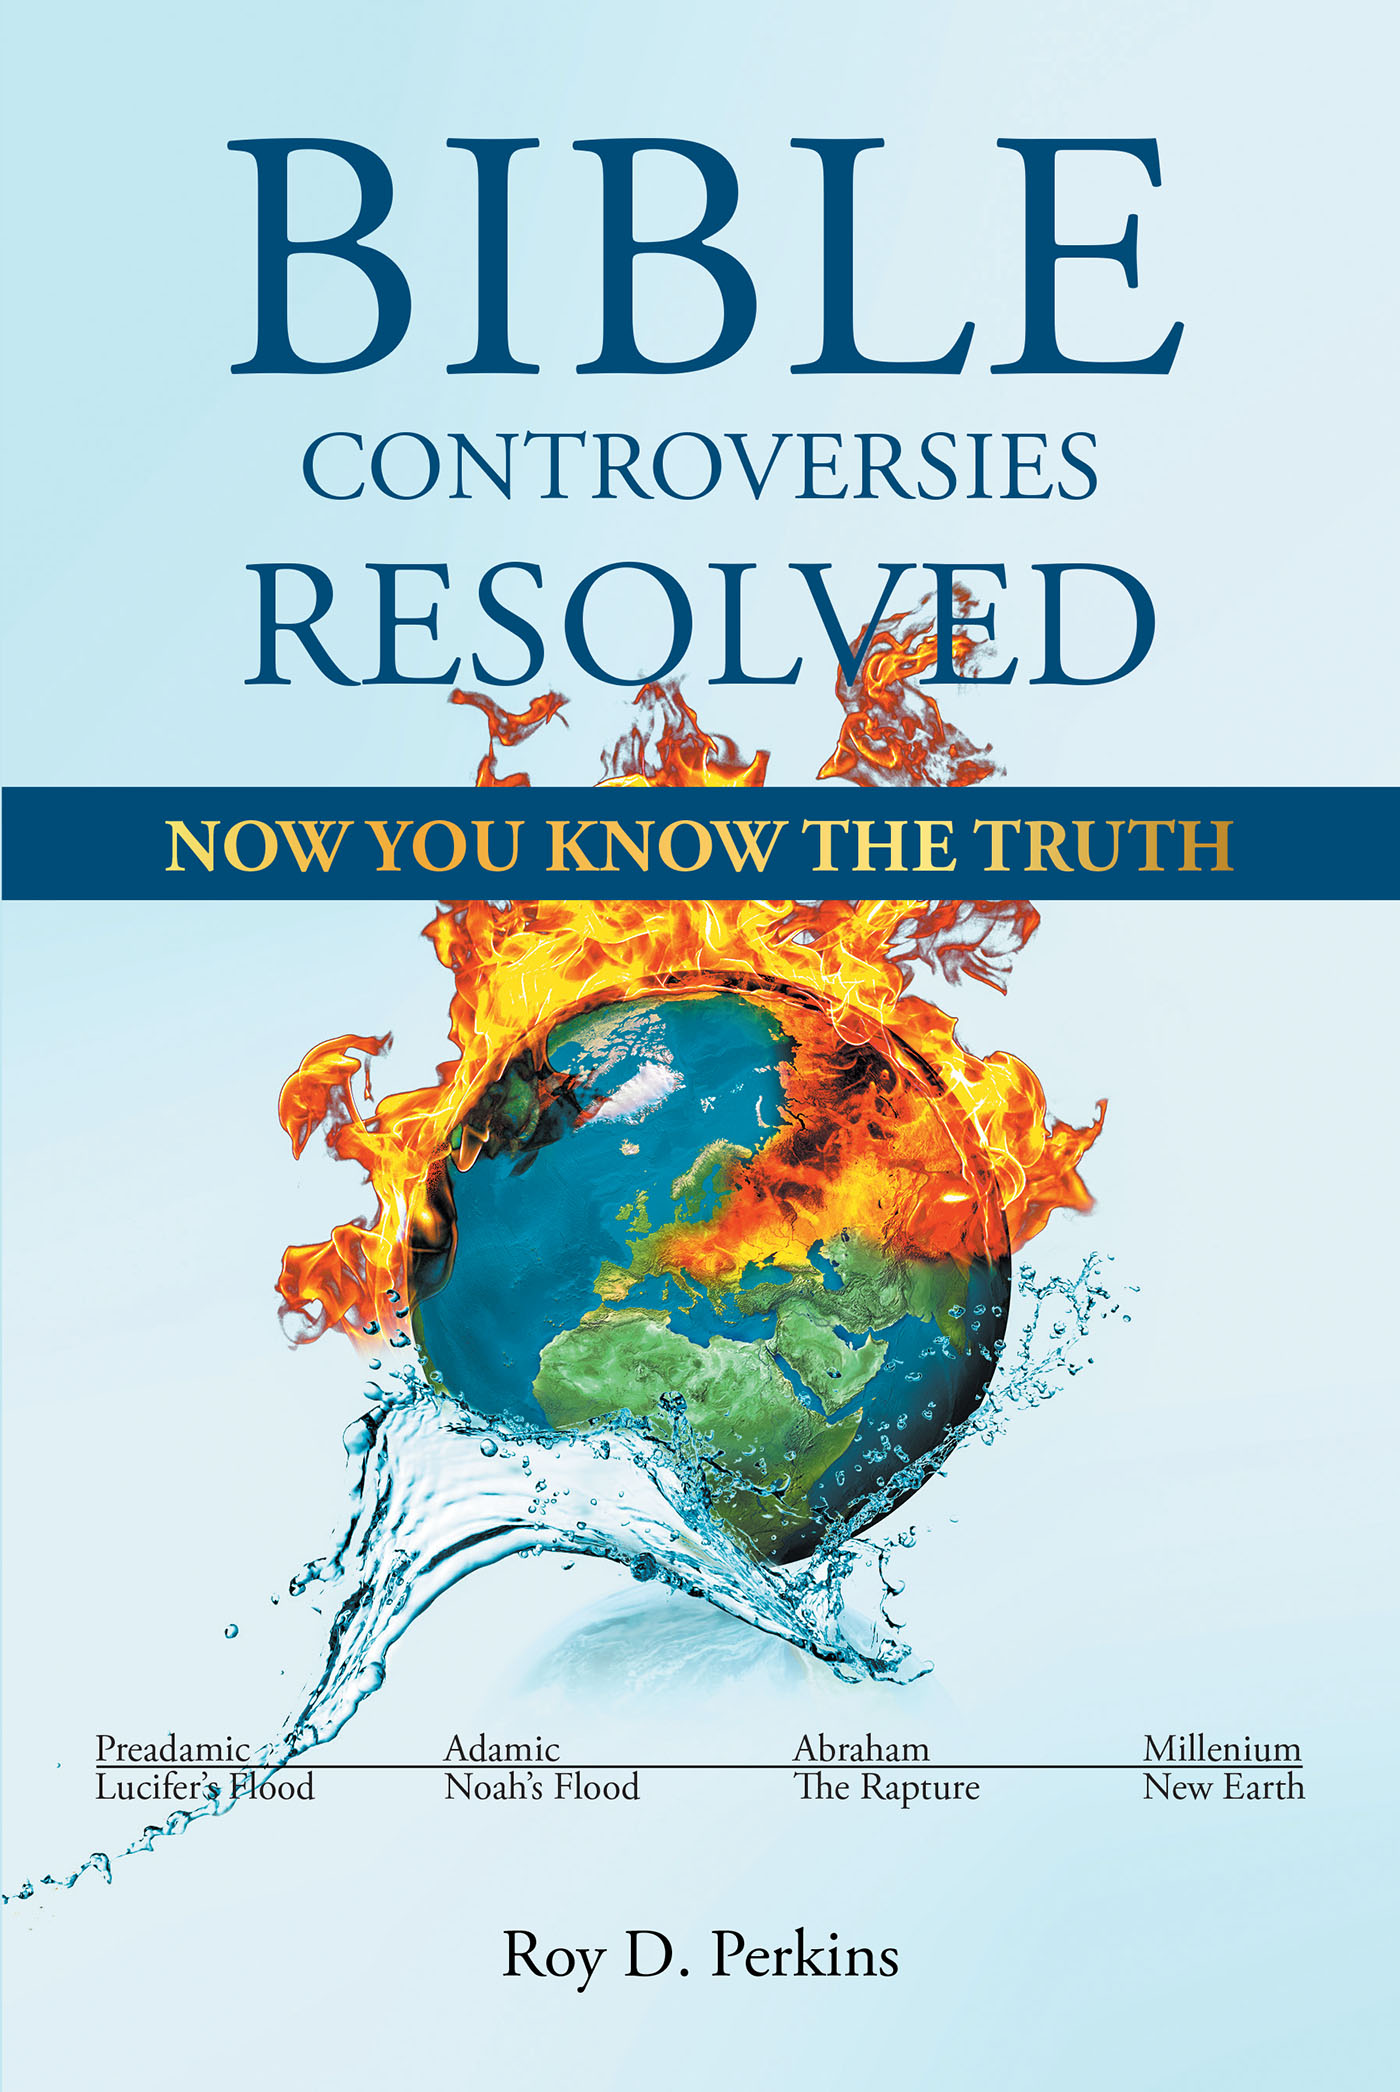 Author Roy D. Perkins’s New Book, “Bible Controversies Resolved: NOW YOU KNOW THE TRUTH,” is an Objective Exploration of Controversies Often Untouched by the Church